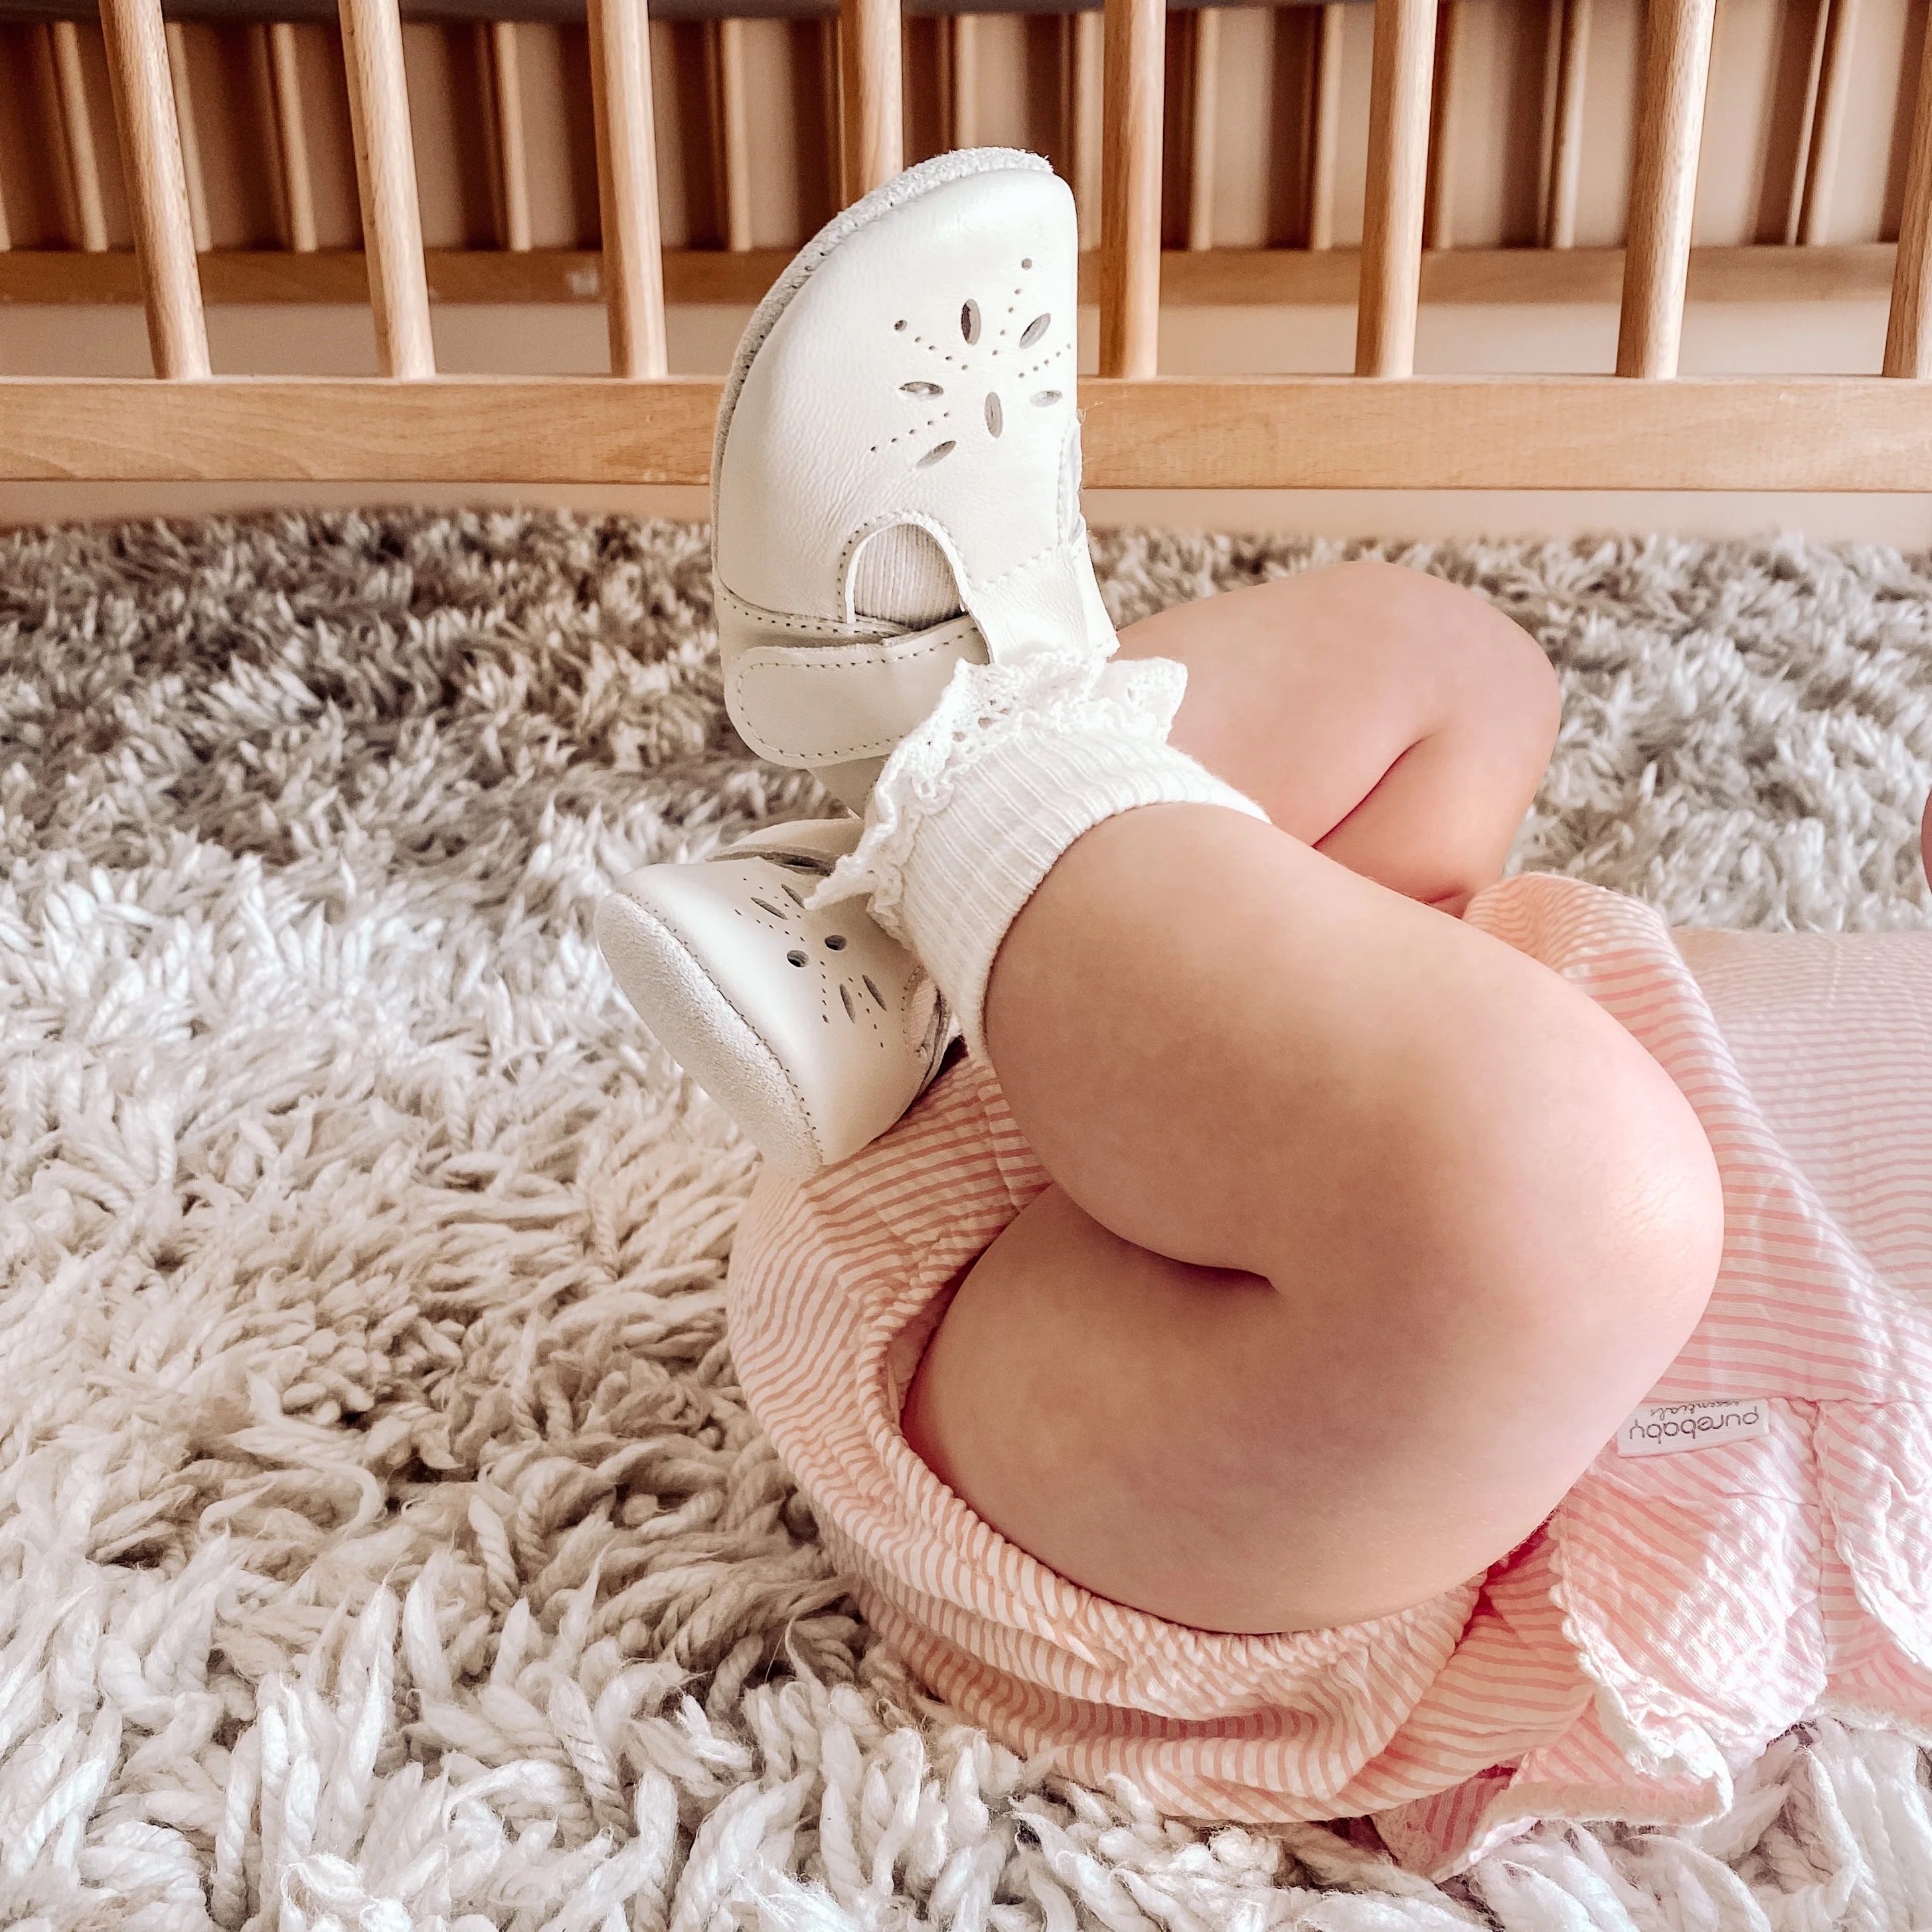 Baby with leggings in air wearing shoes